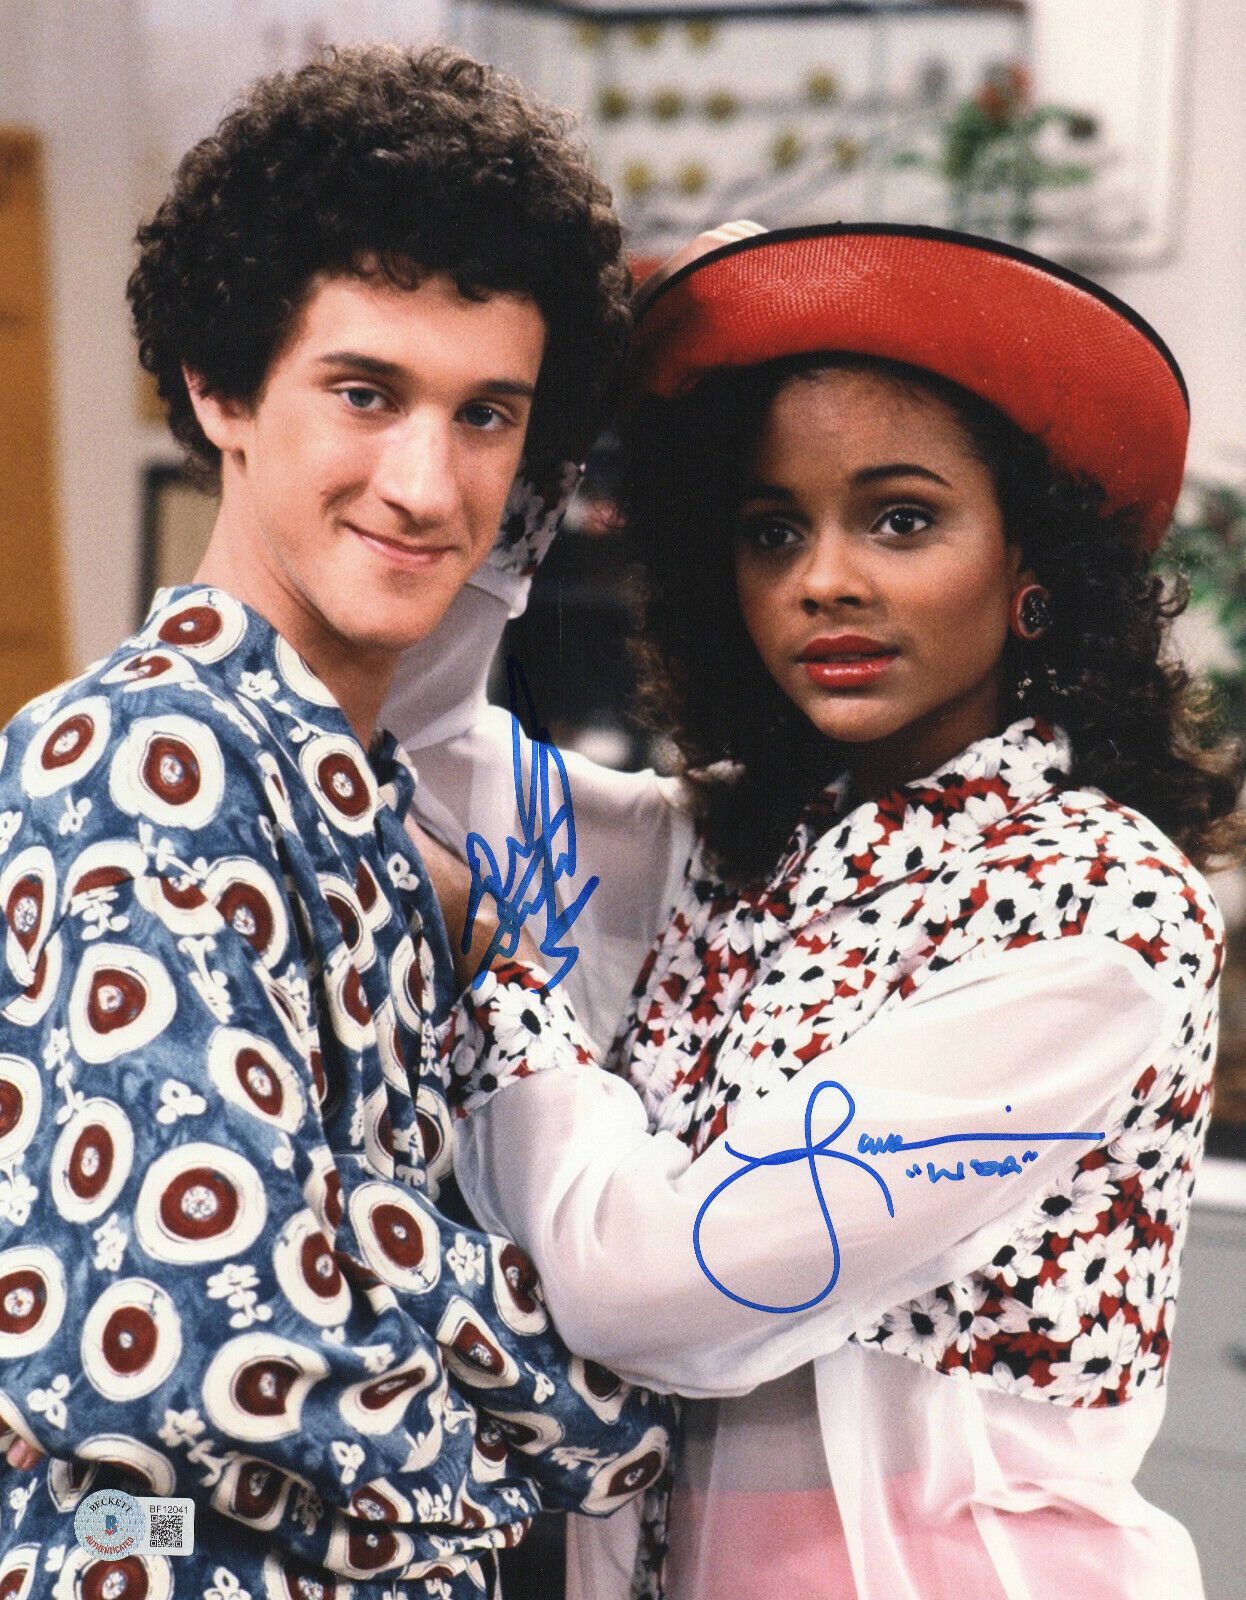 DUSTIN DIAMOND LARK VOORHIES SIGNED 11X14 SAVED BY THE BELL PHOTO AUTO BECKETT 